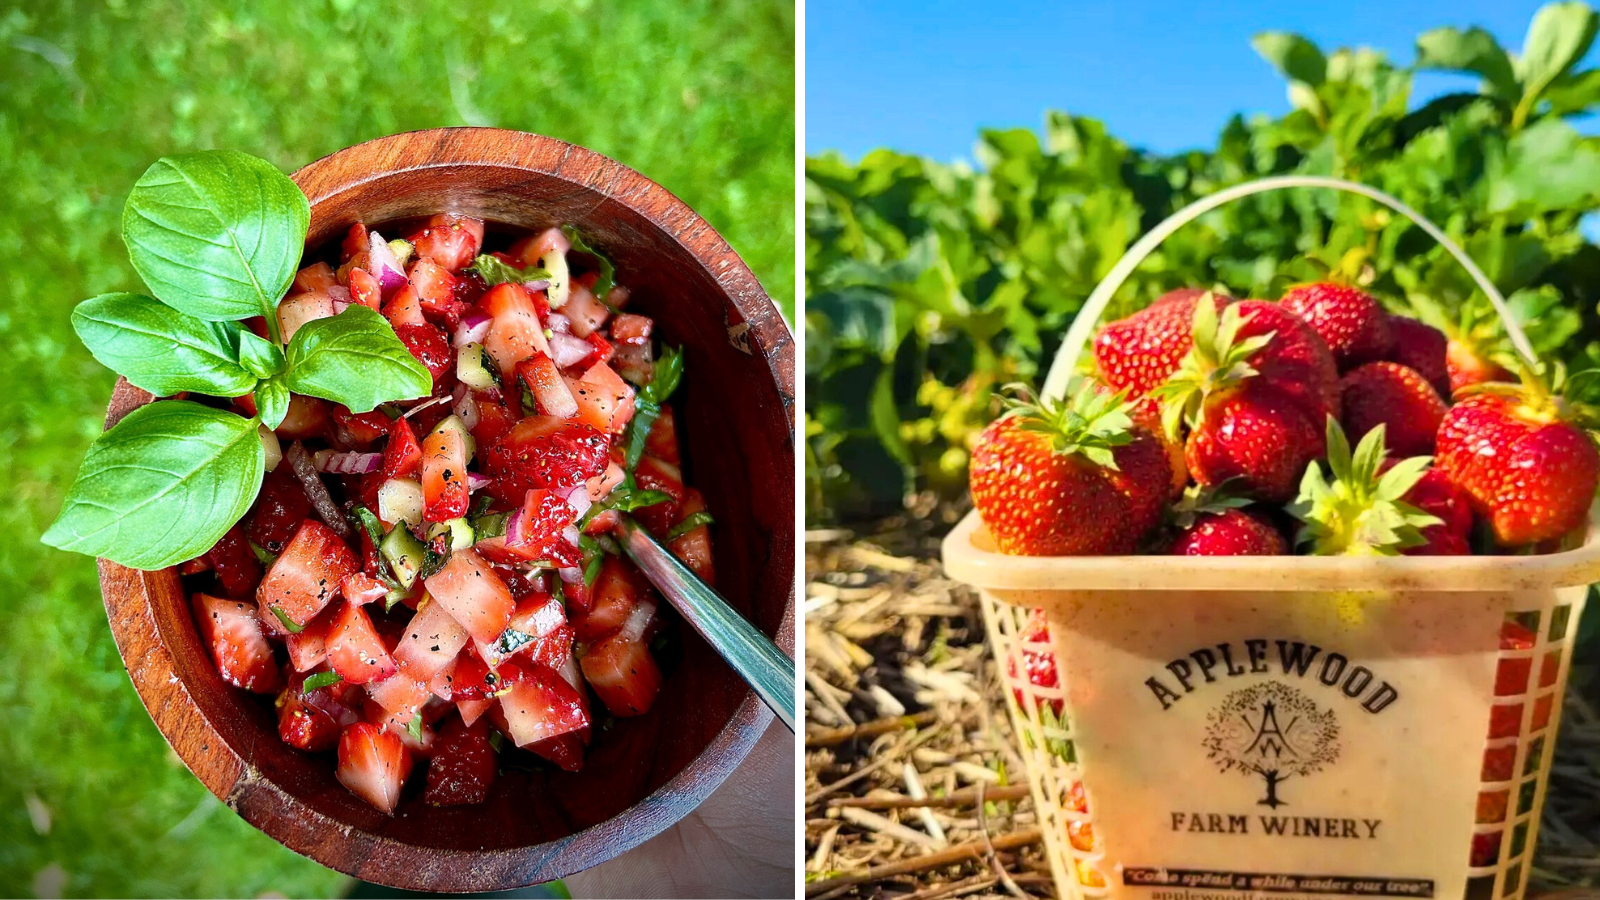 Collage of images including an aerial image of charred chili and strawberry salsa and a basket of strawberries